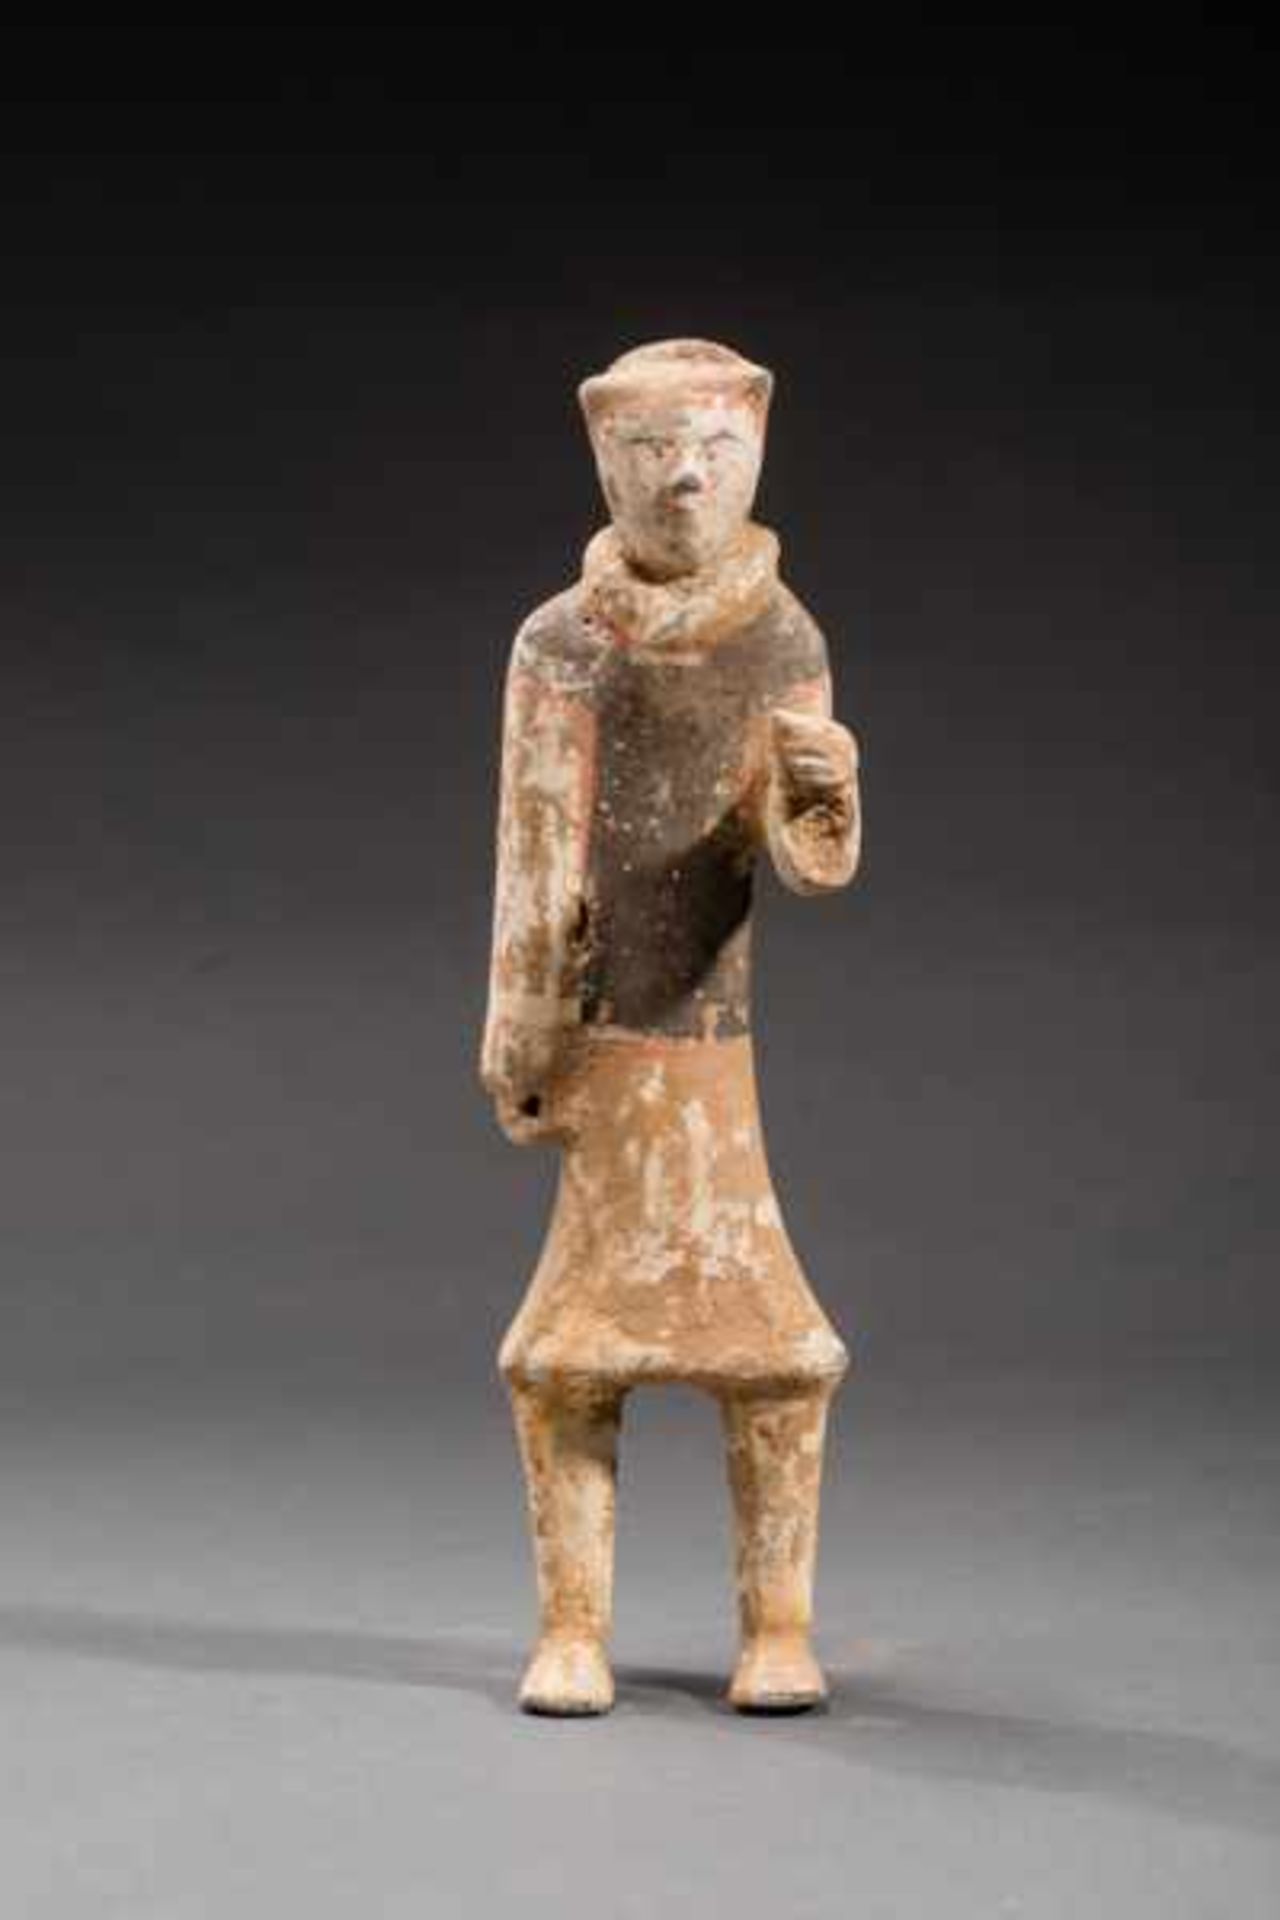 SMALL GUARDSMAN Terracotta with remnants of originalpainting. China, Early Western Handynasty (3rd - Image 2 of 3